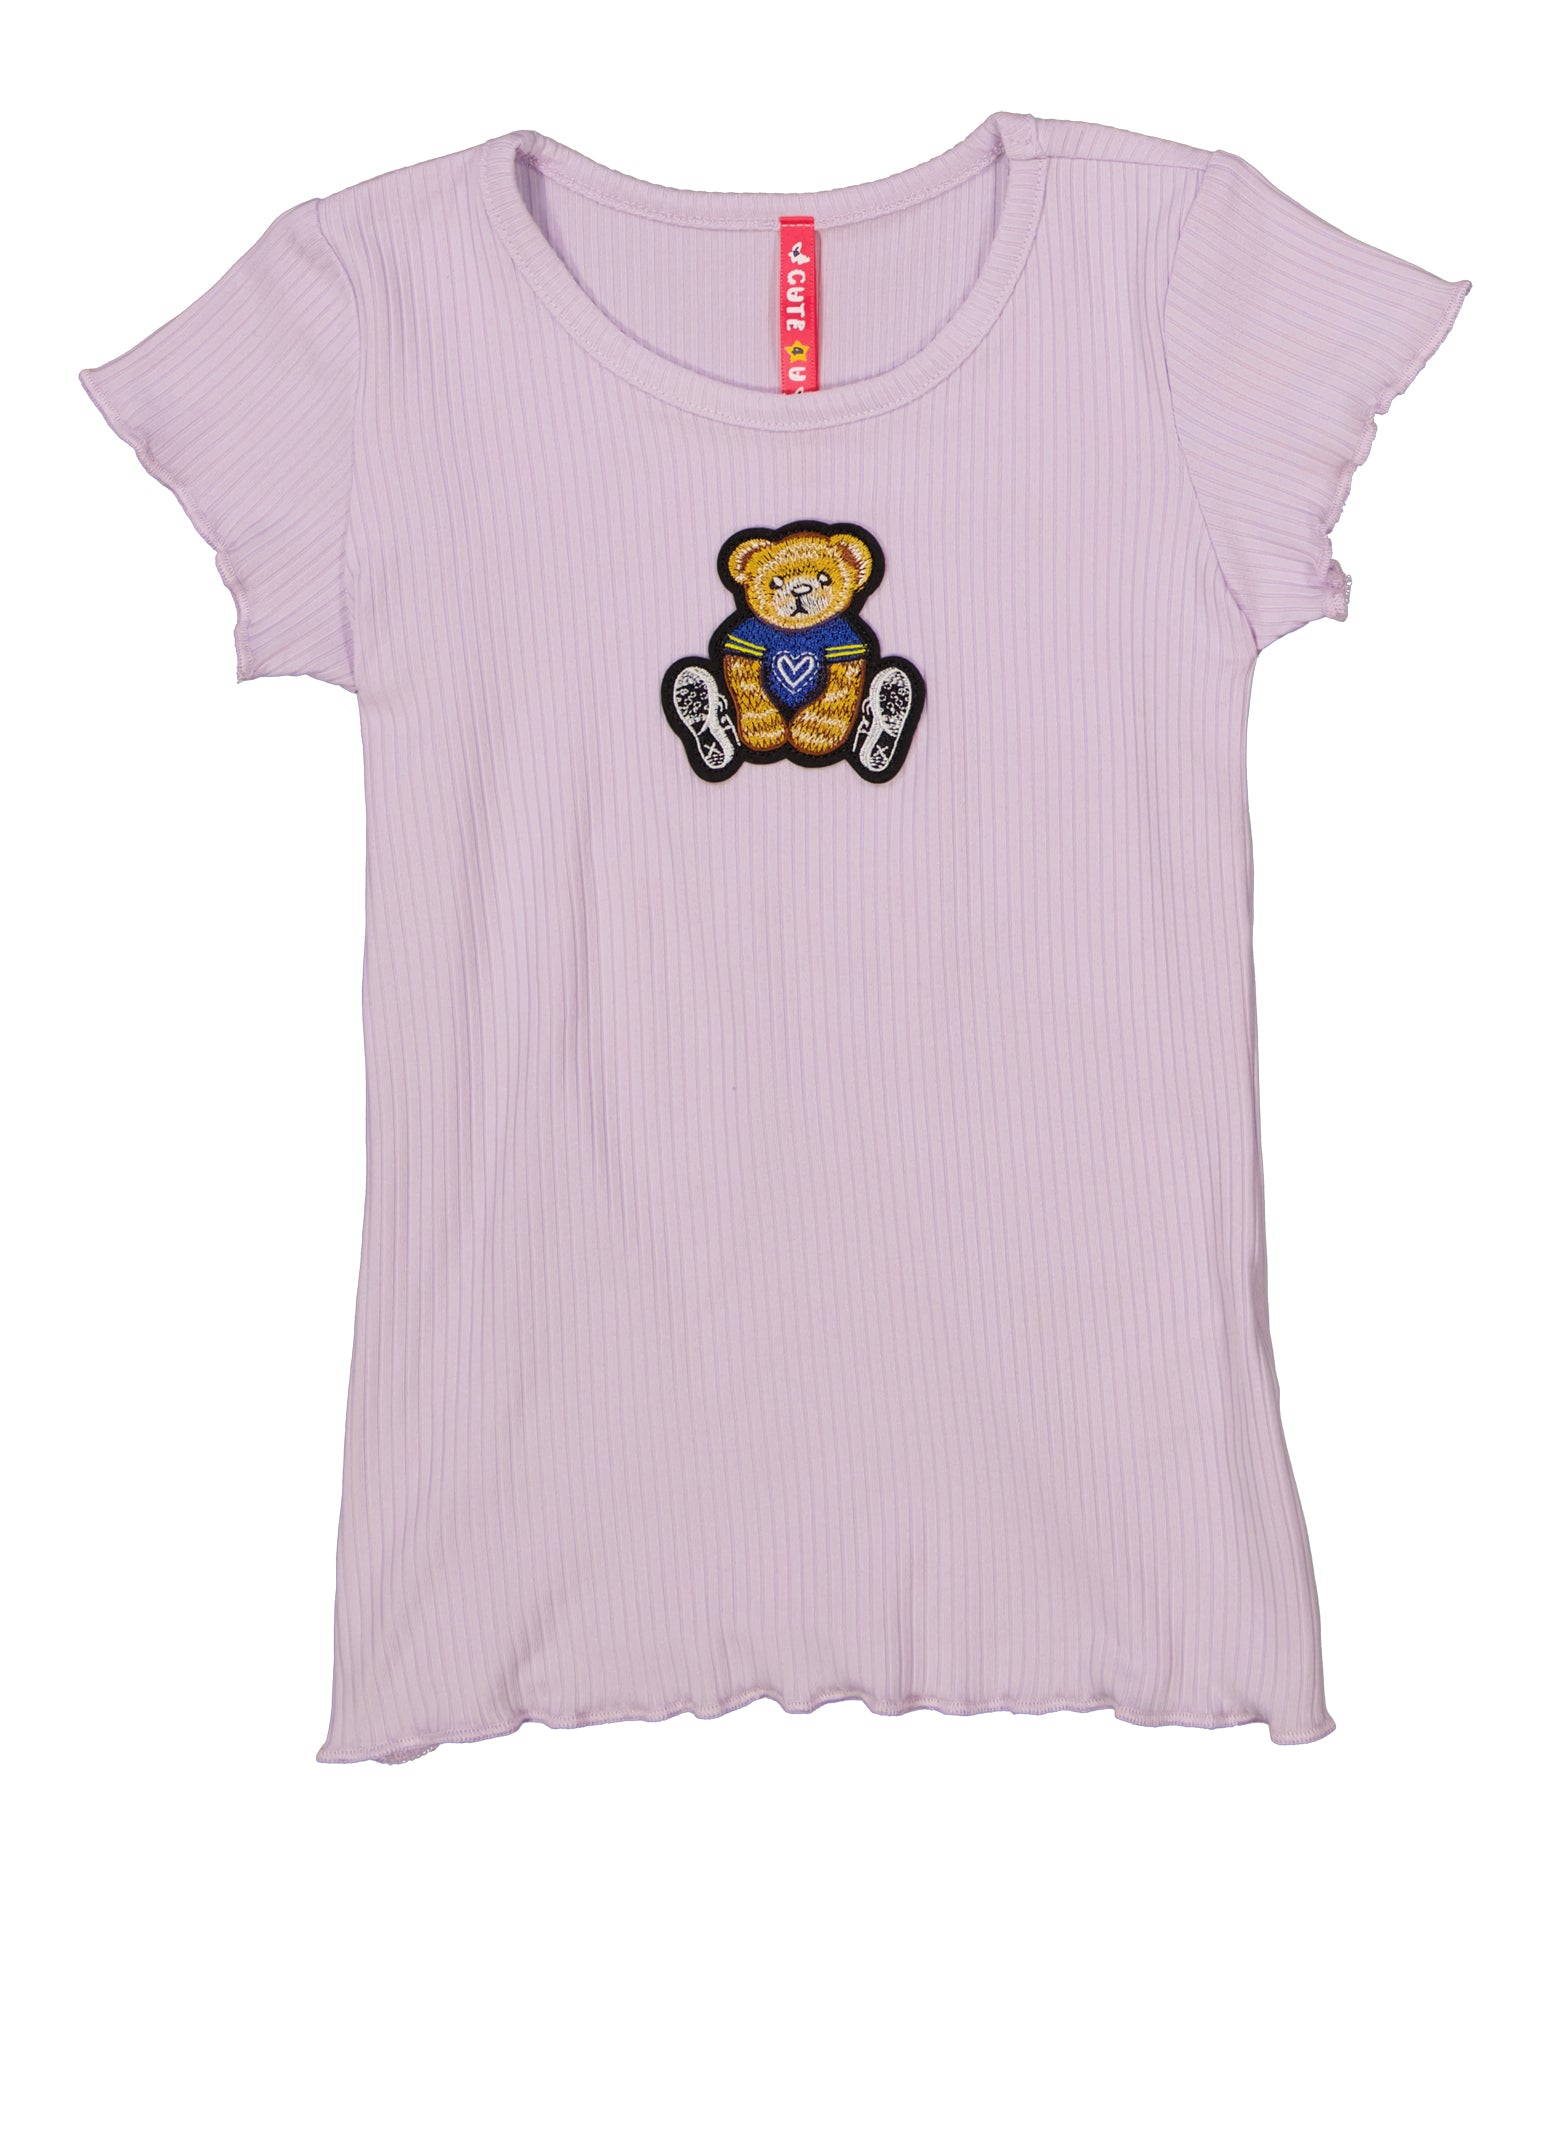 Little Girls Ribbed Bear Embroidered Top, Purple, Size 4